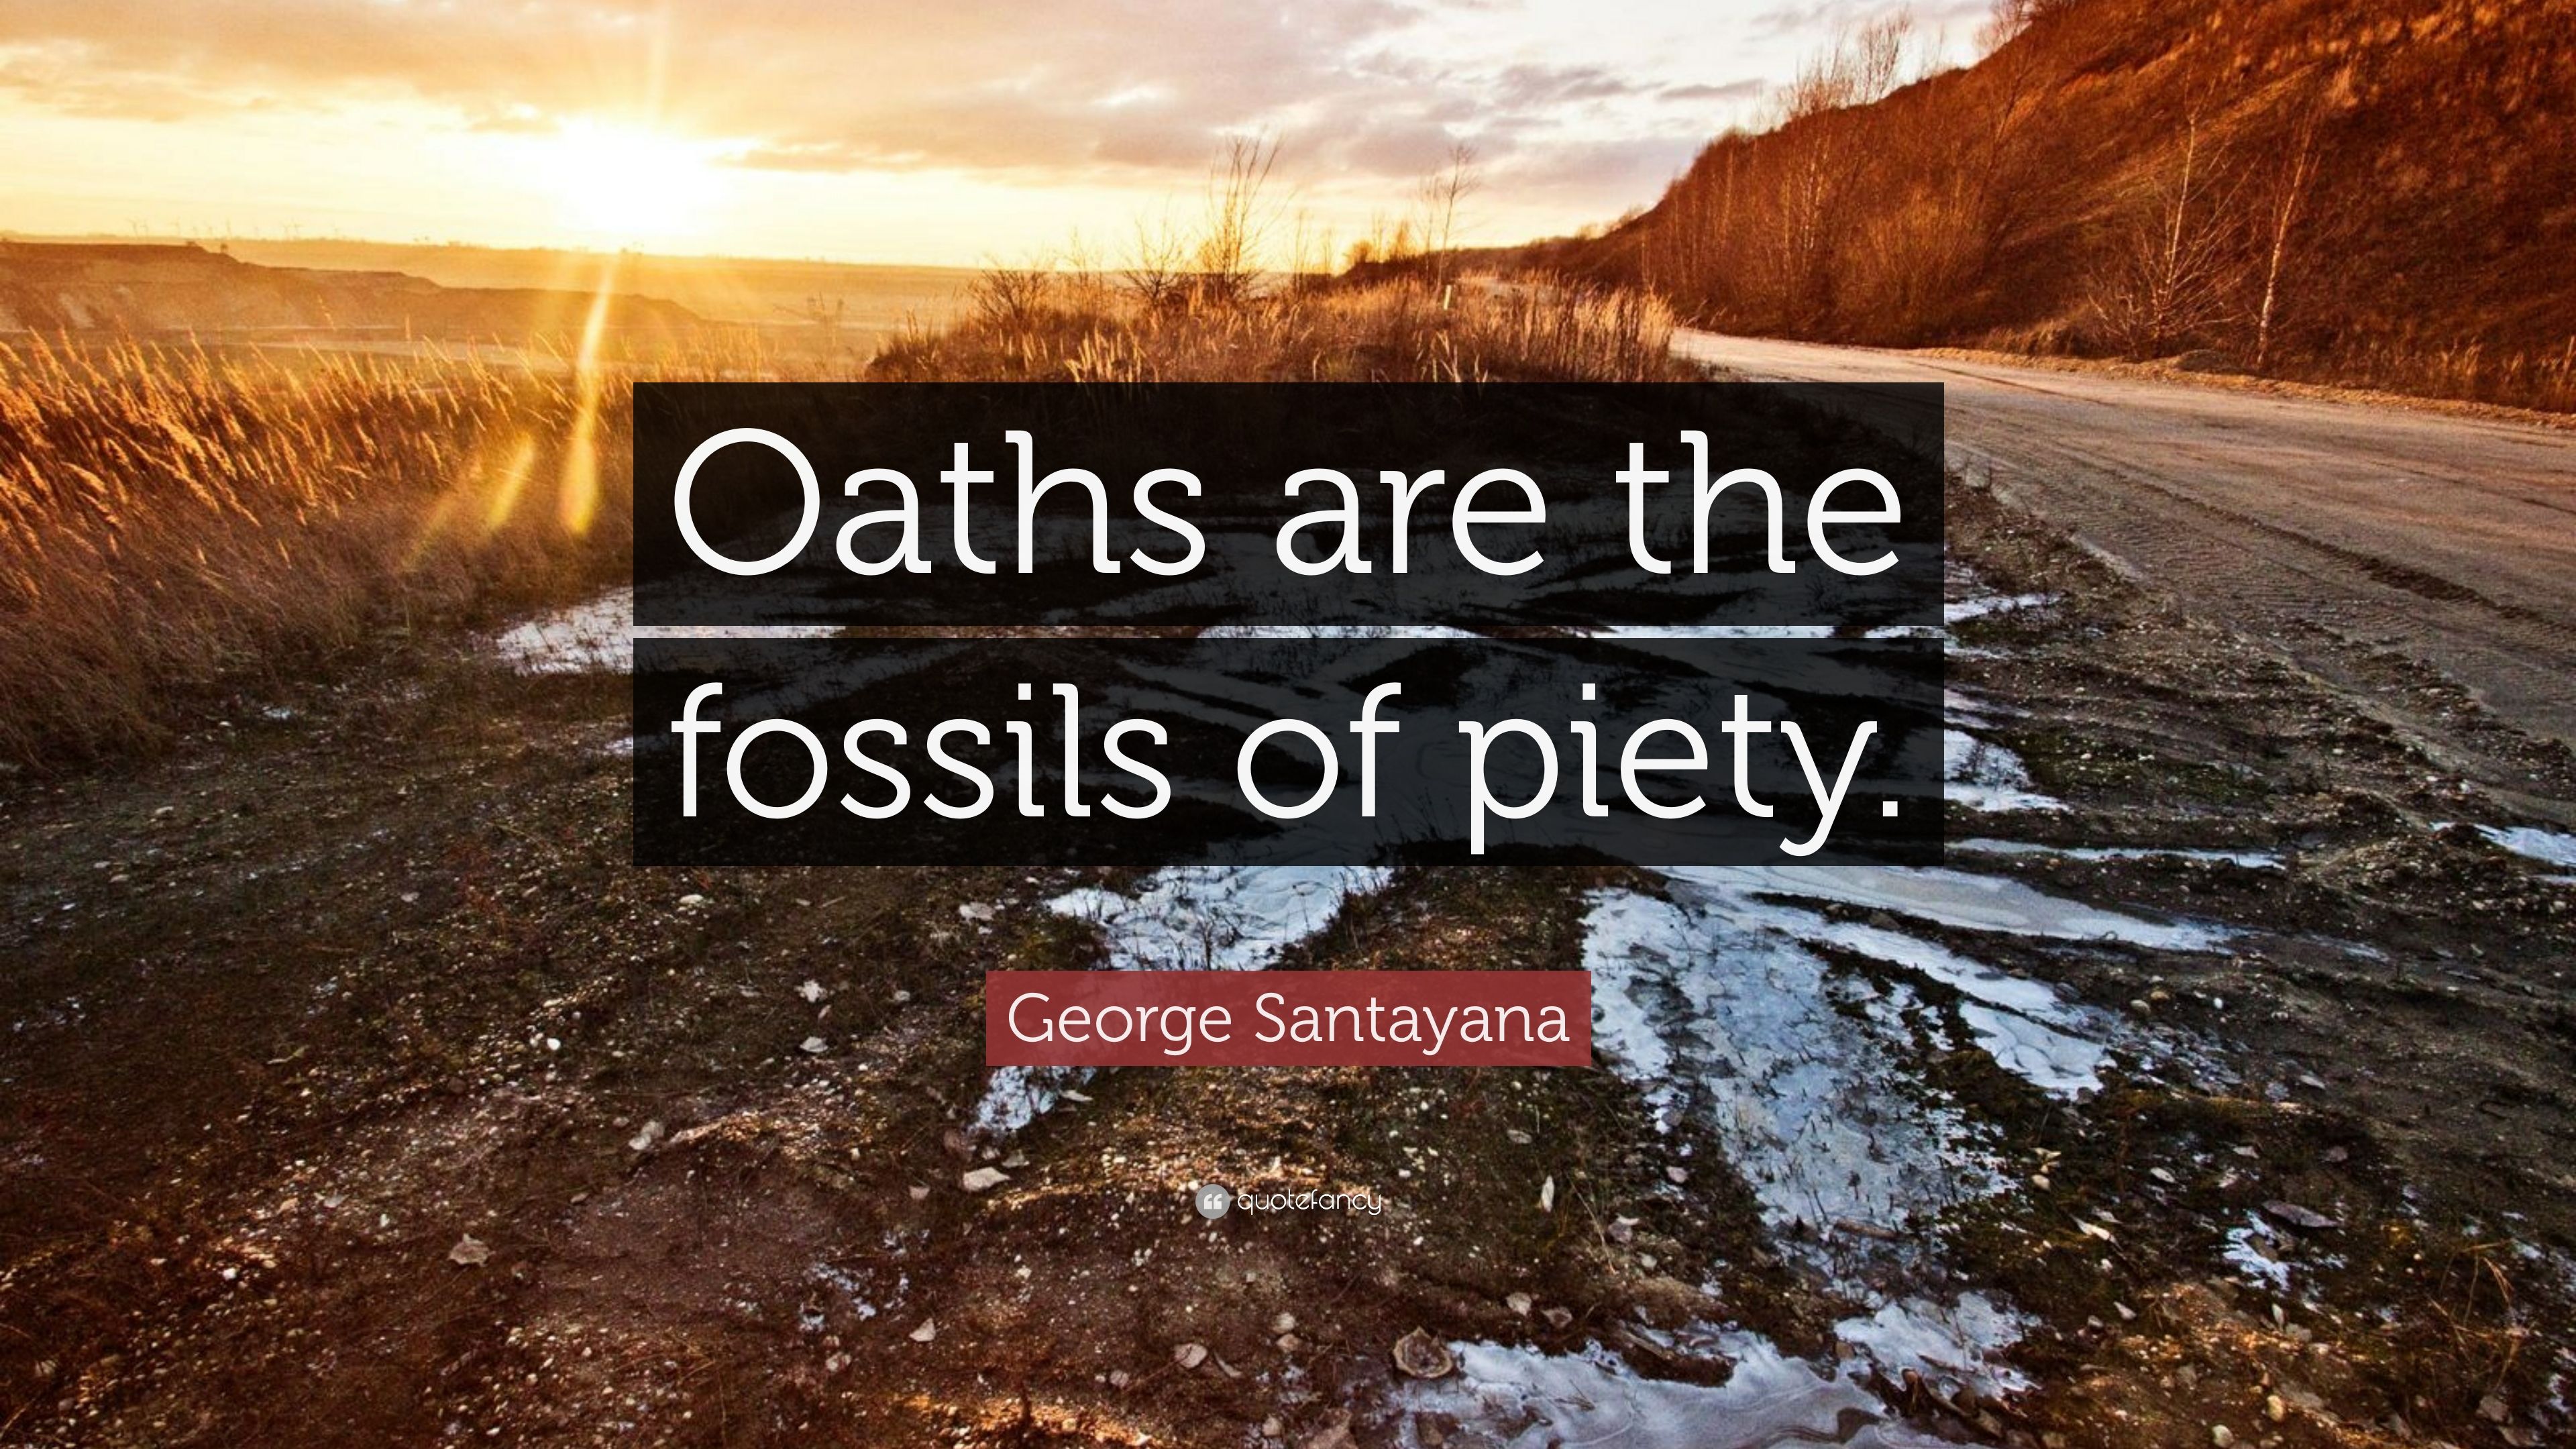 George Santayana Quote: “Oaths are the fossils of piety.” 9